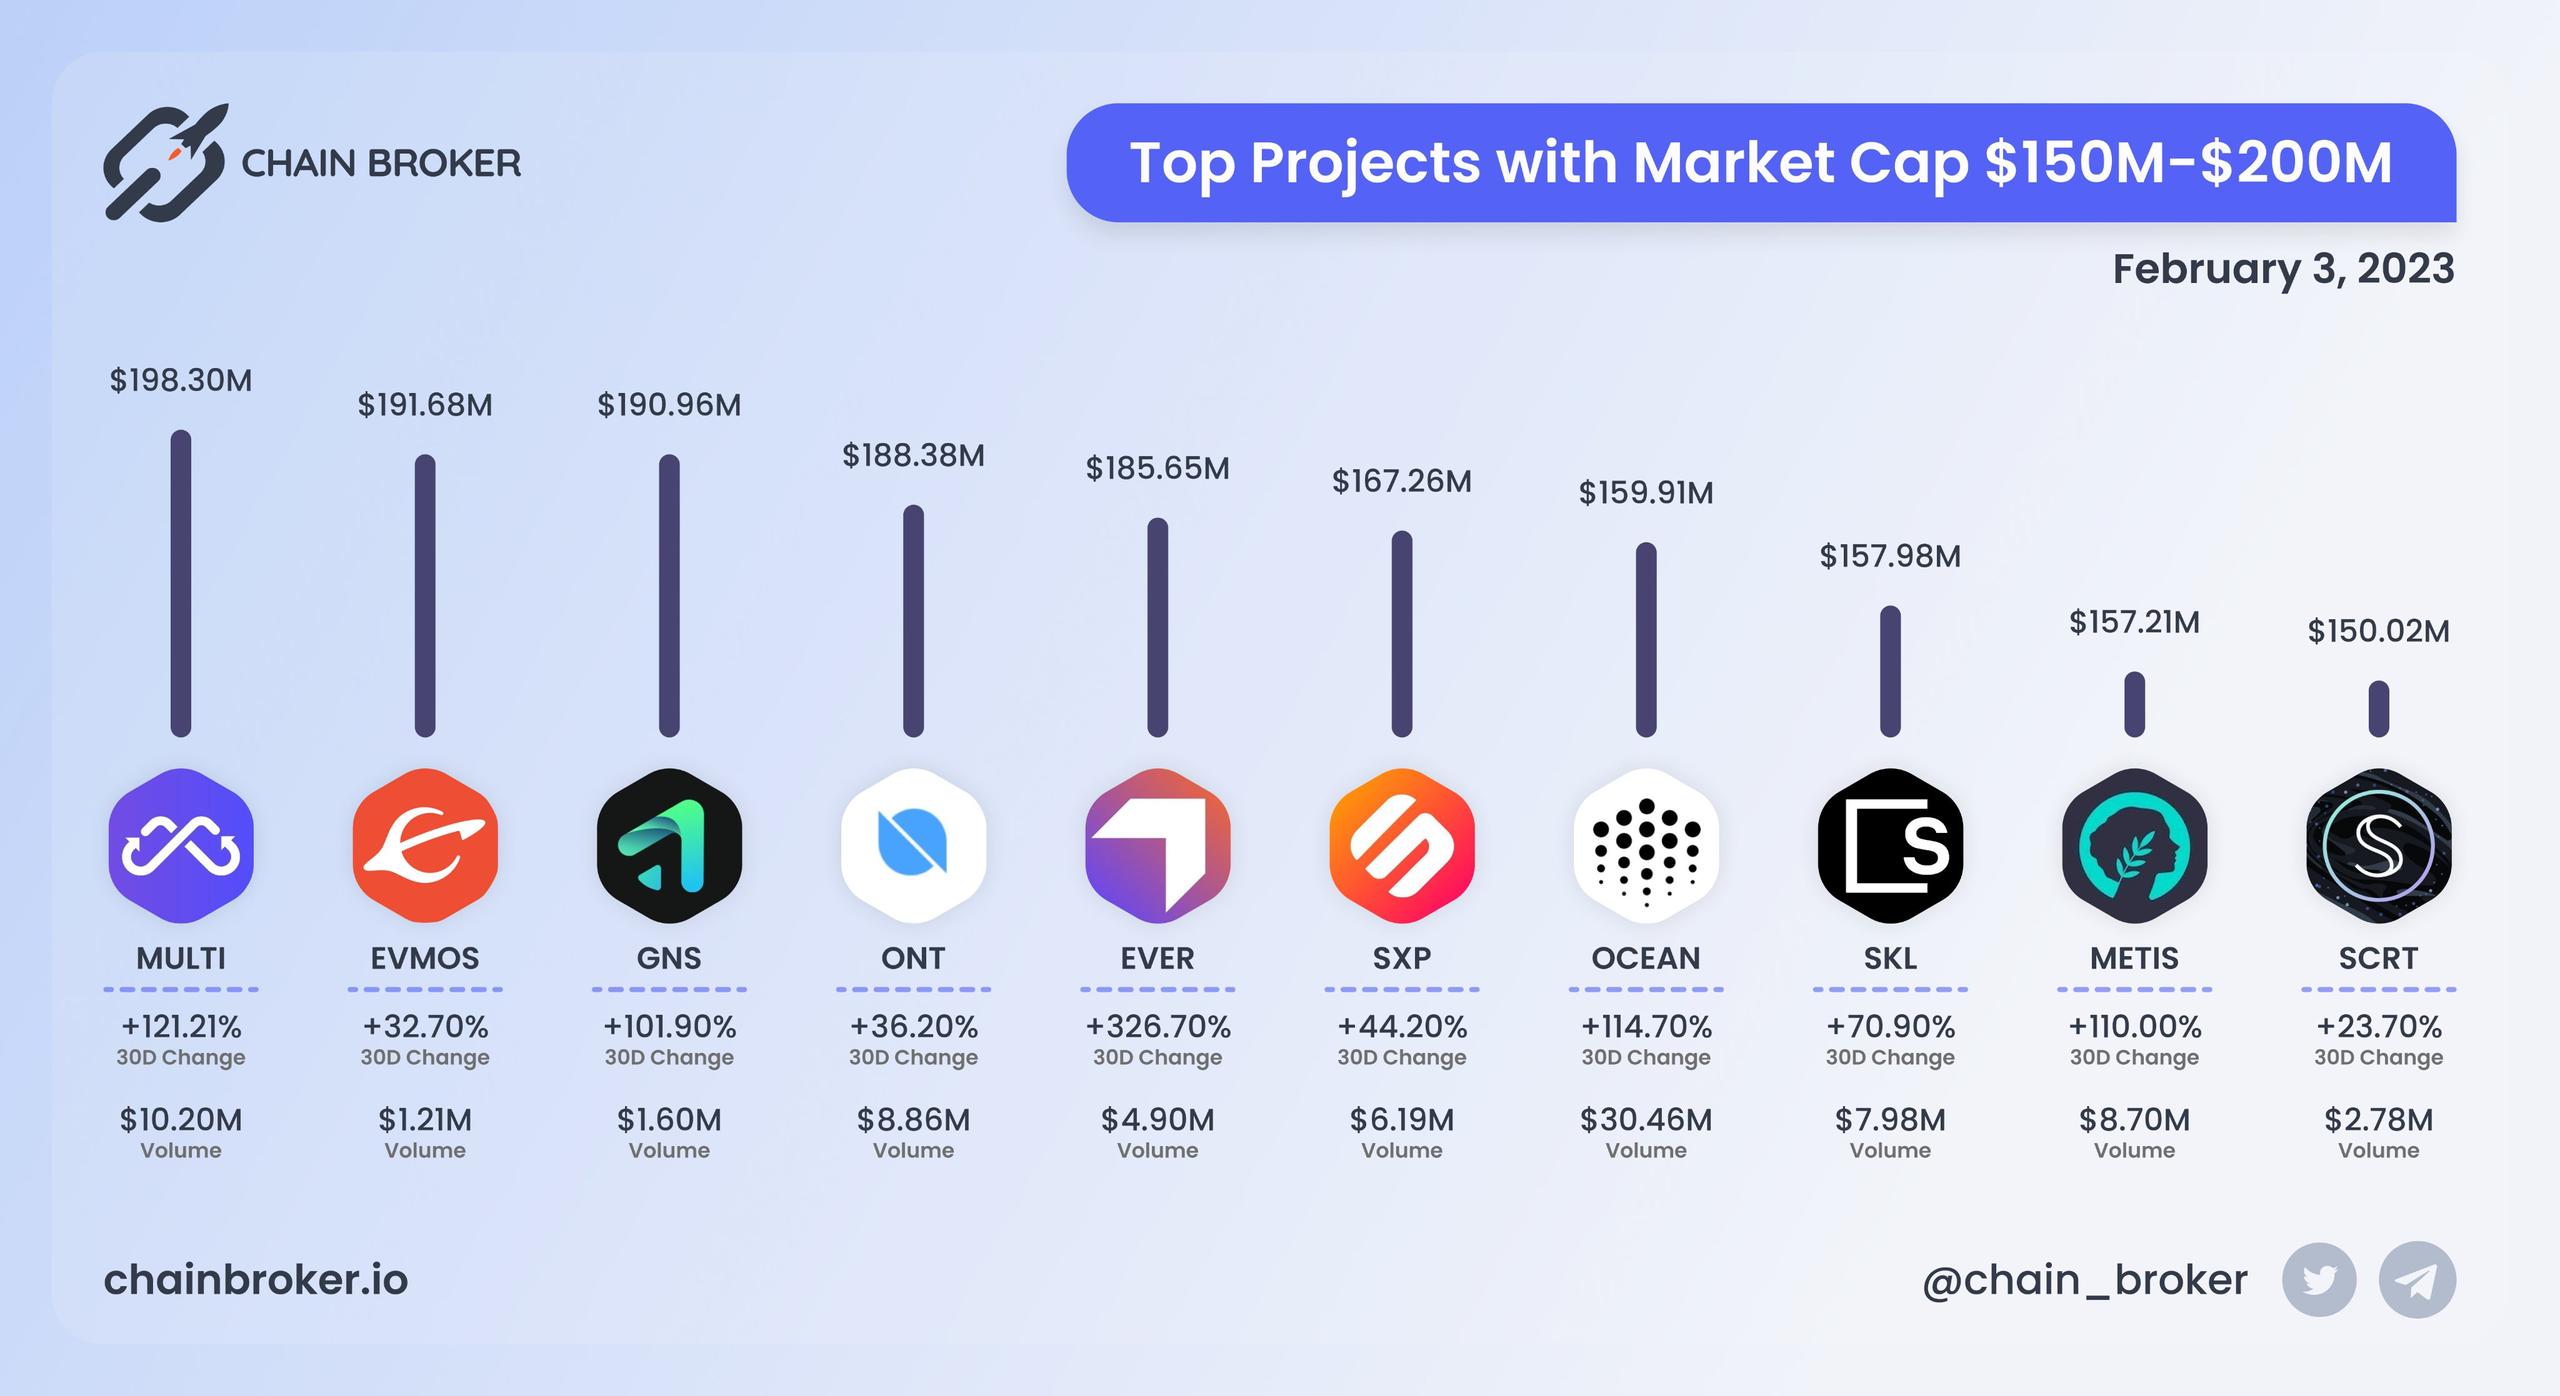 Top projects with Market Cap $150M - $200M